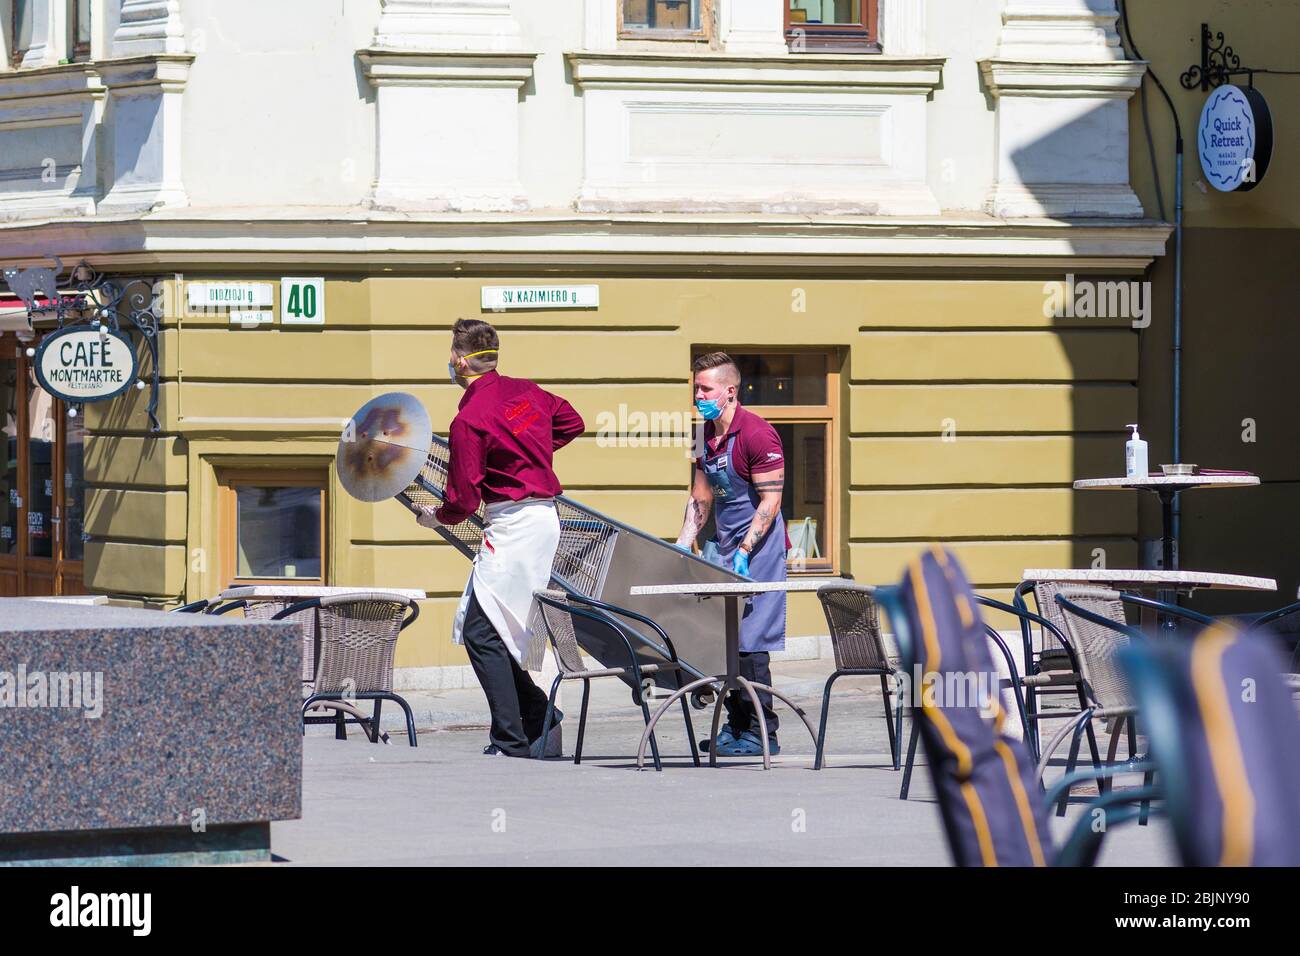 Waiters with a mask reopen an outdoor bar, café or restaurant after quarantine restrictions Stock Photo